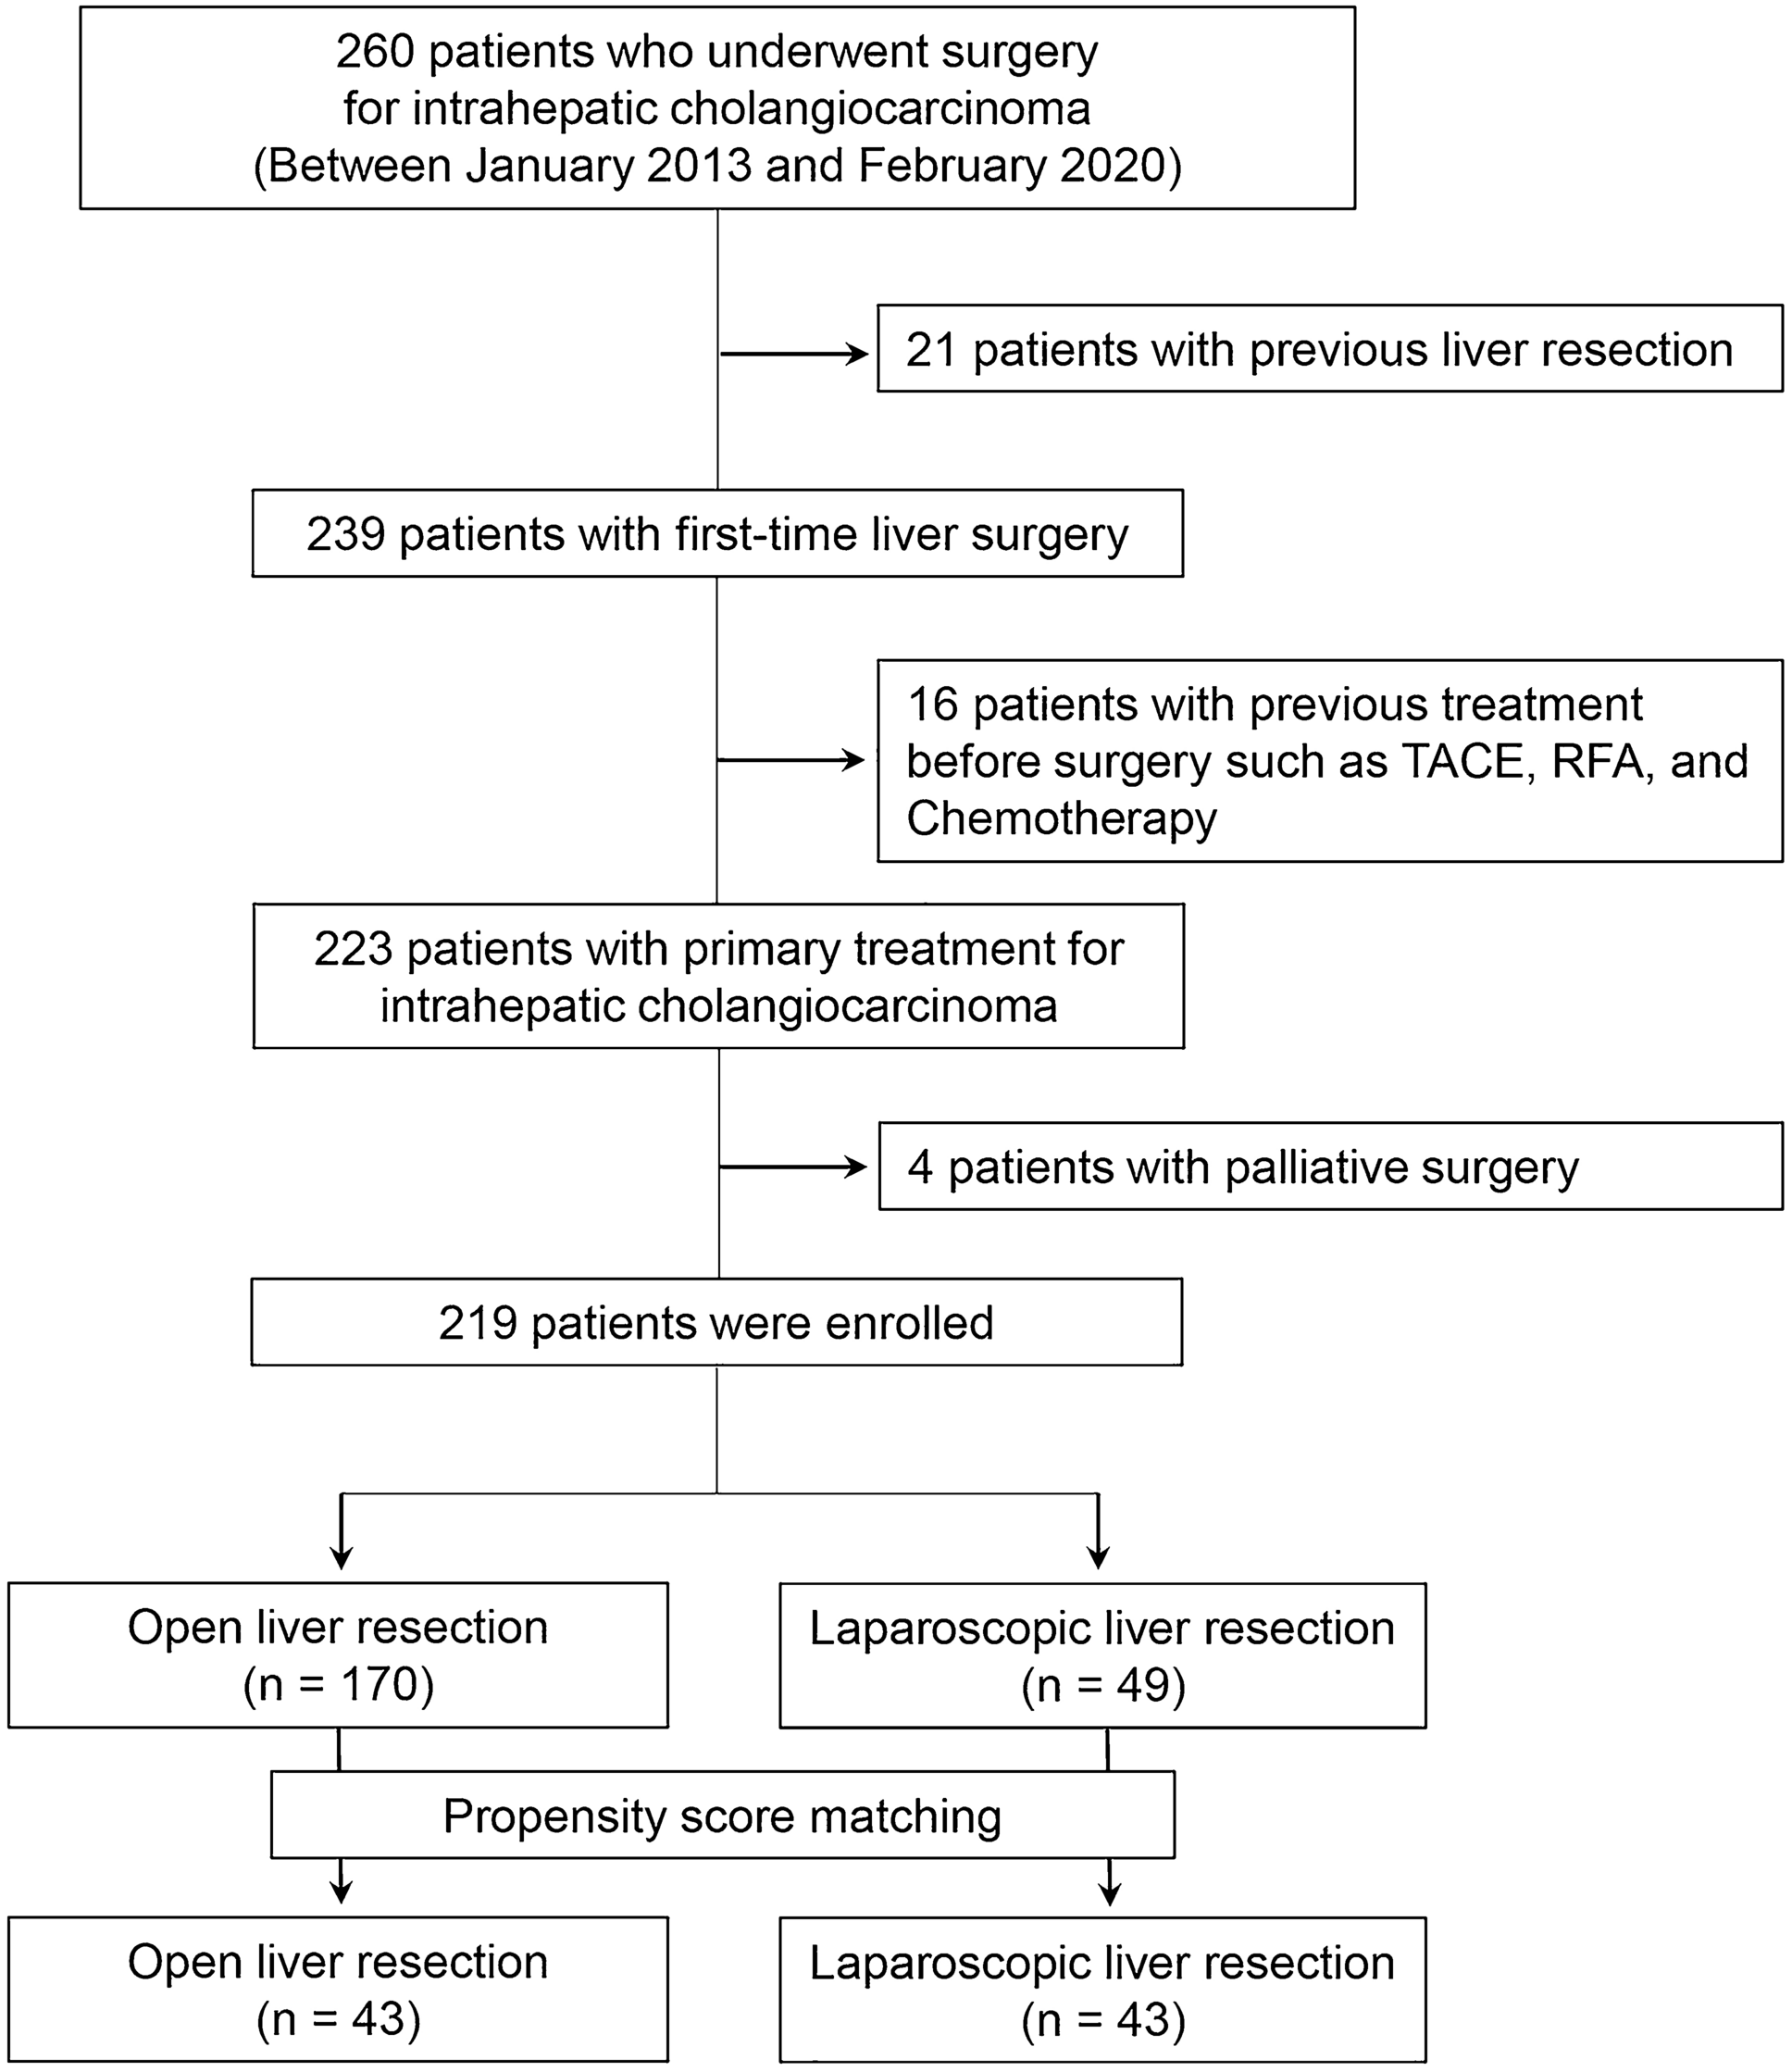 Laparoscopic liver resection as a treatment option for intrahepatic cholangiocarcinoma